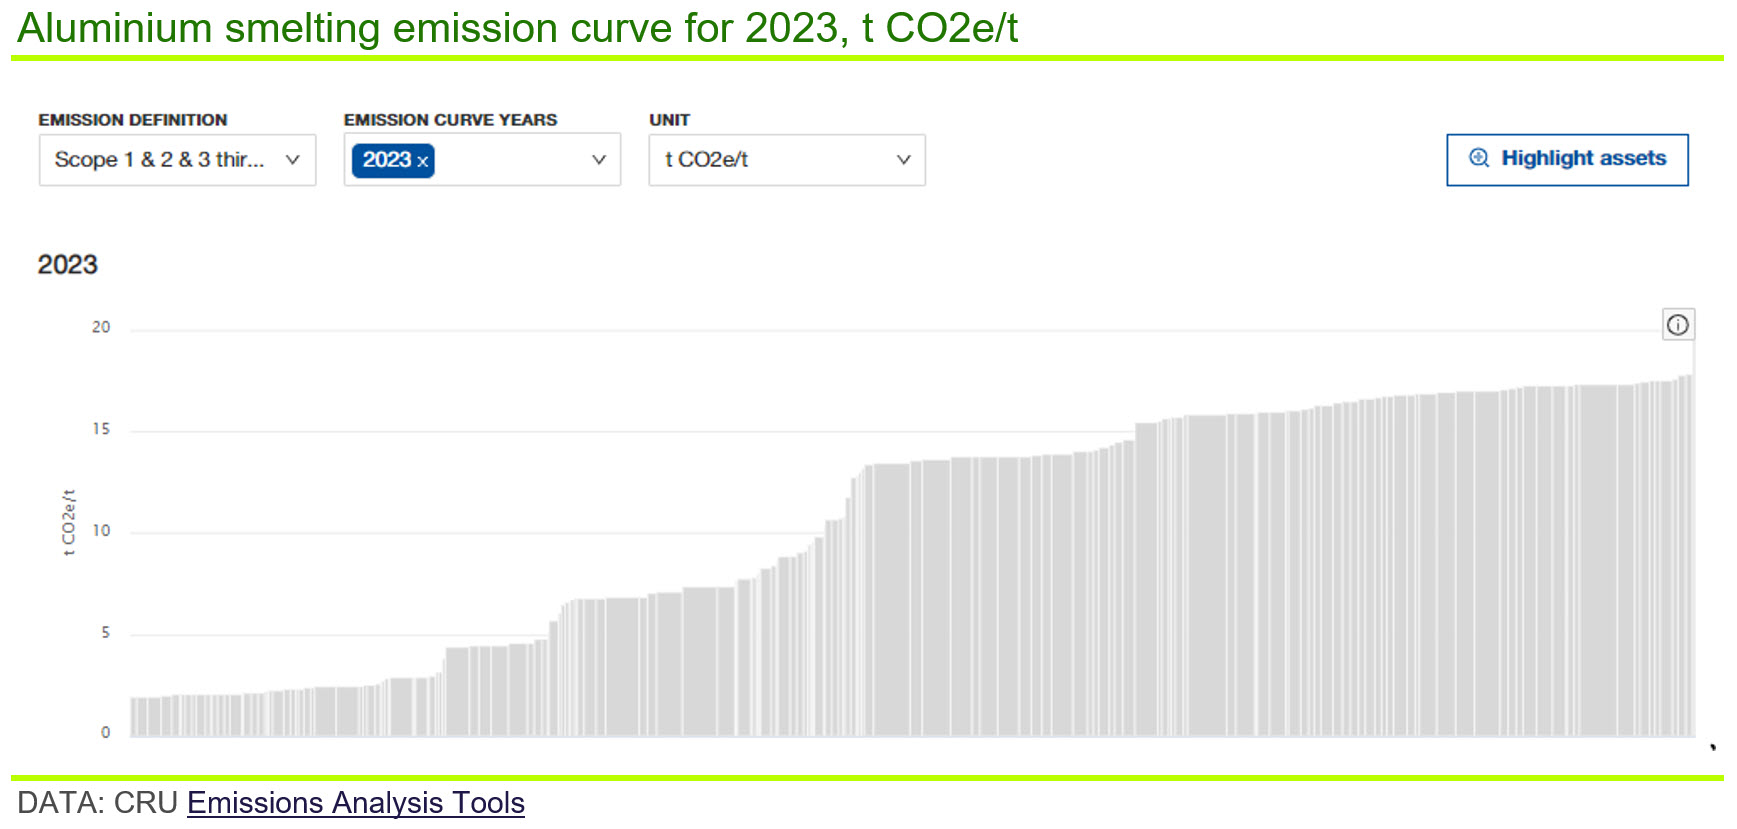 Graph showing the aluminium smelting emission curve for 2023